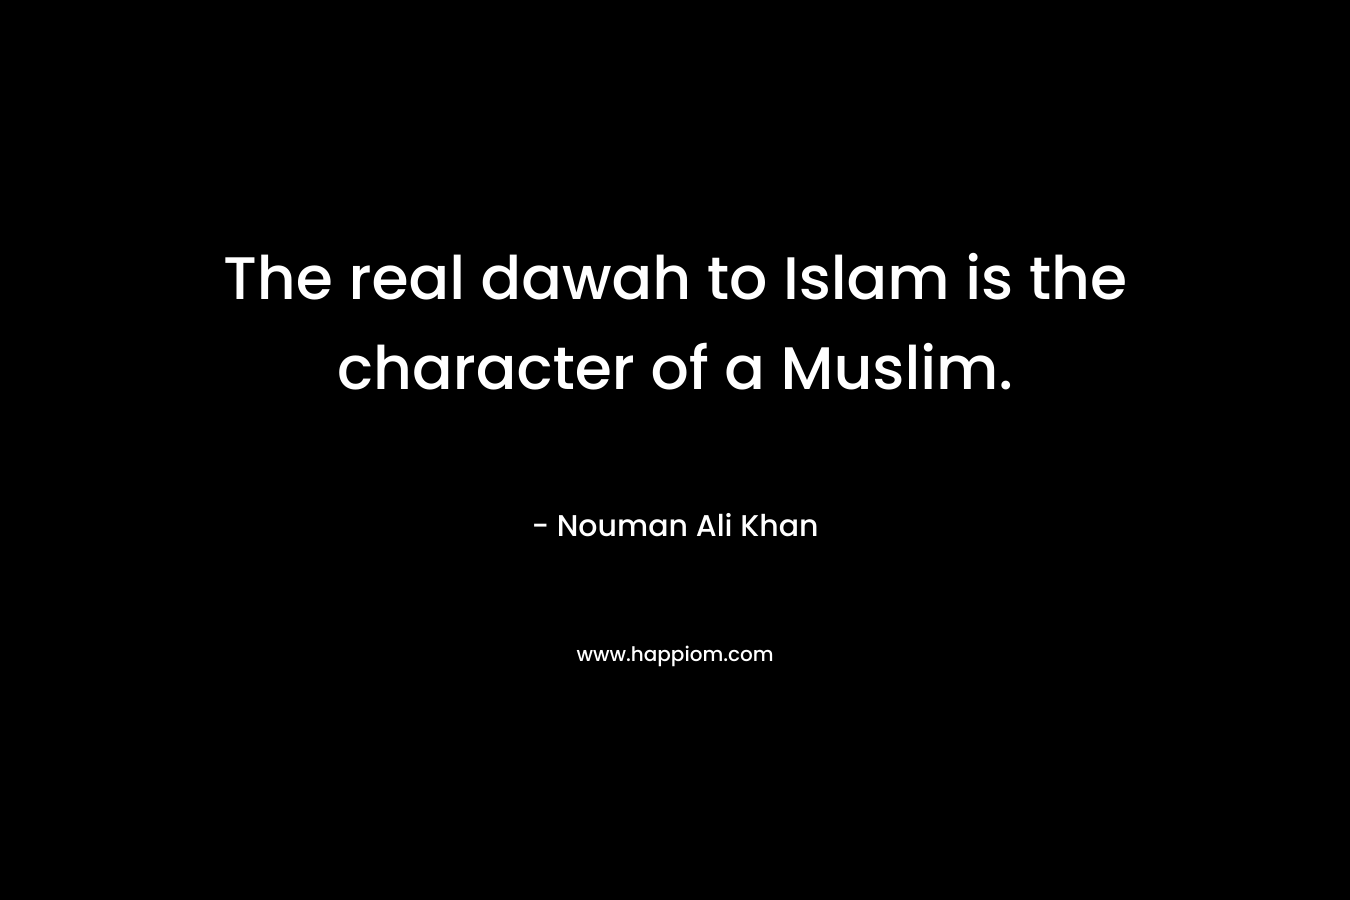 The real dawah to Islam is the character of a Muslim.